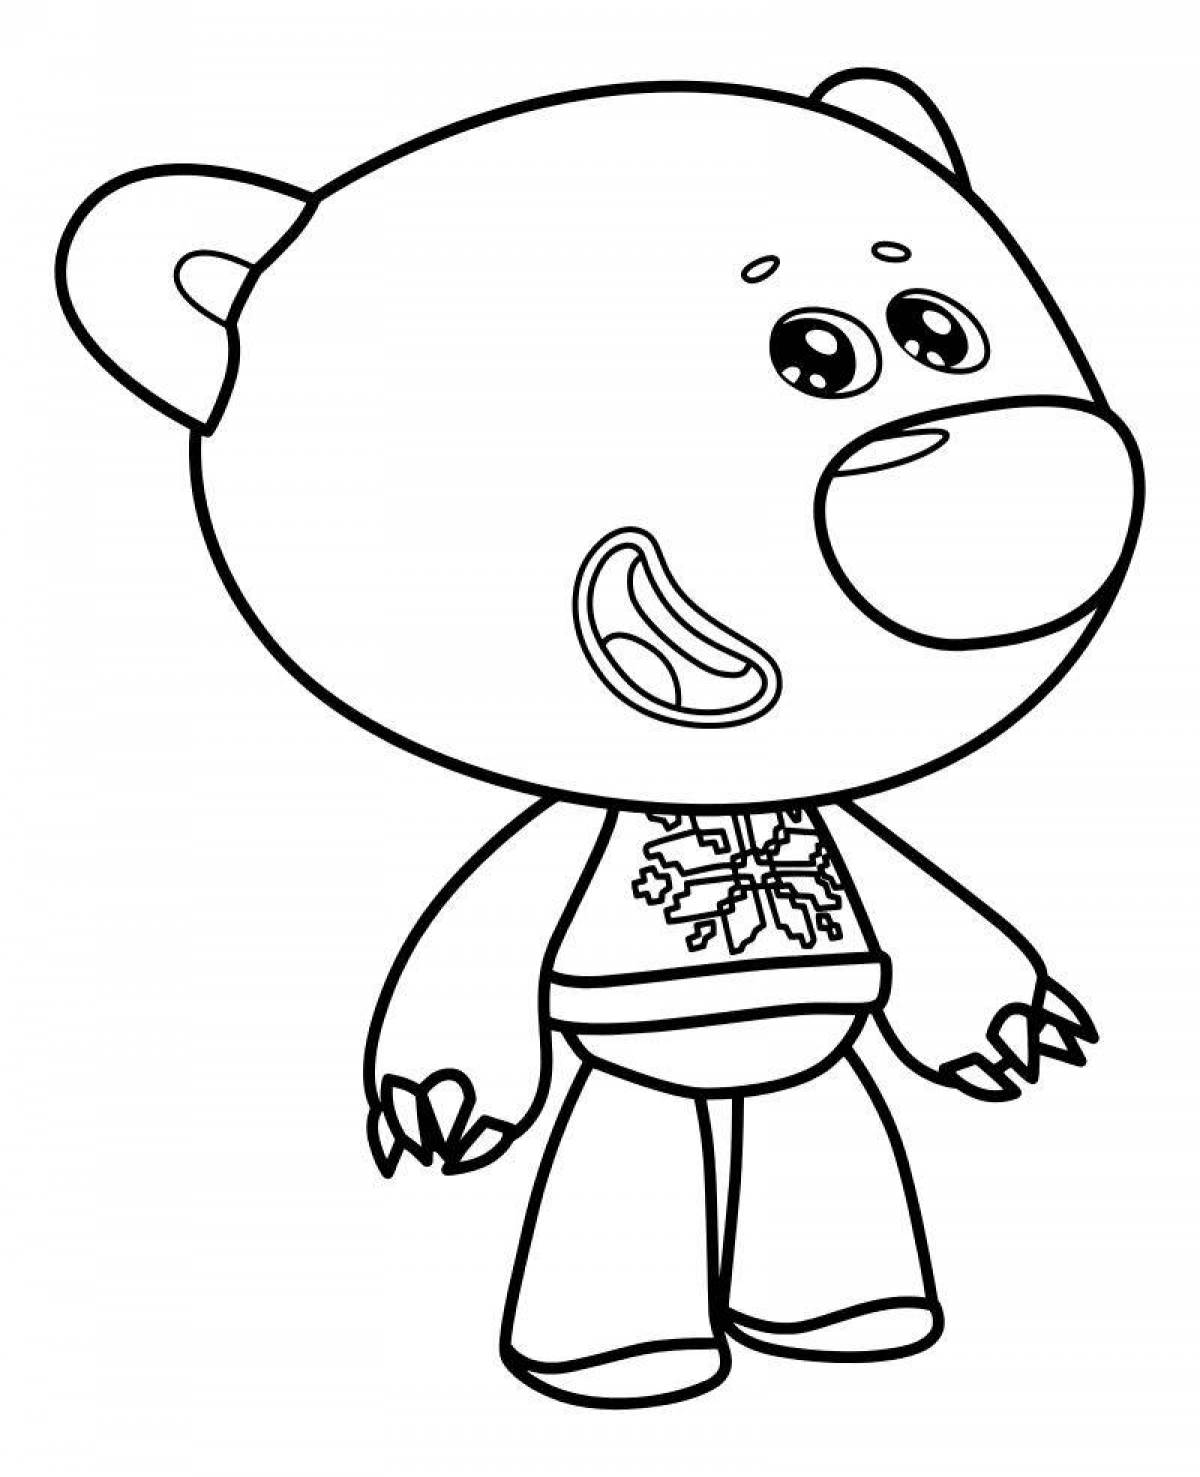 Fun cartoon coloring pages